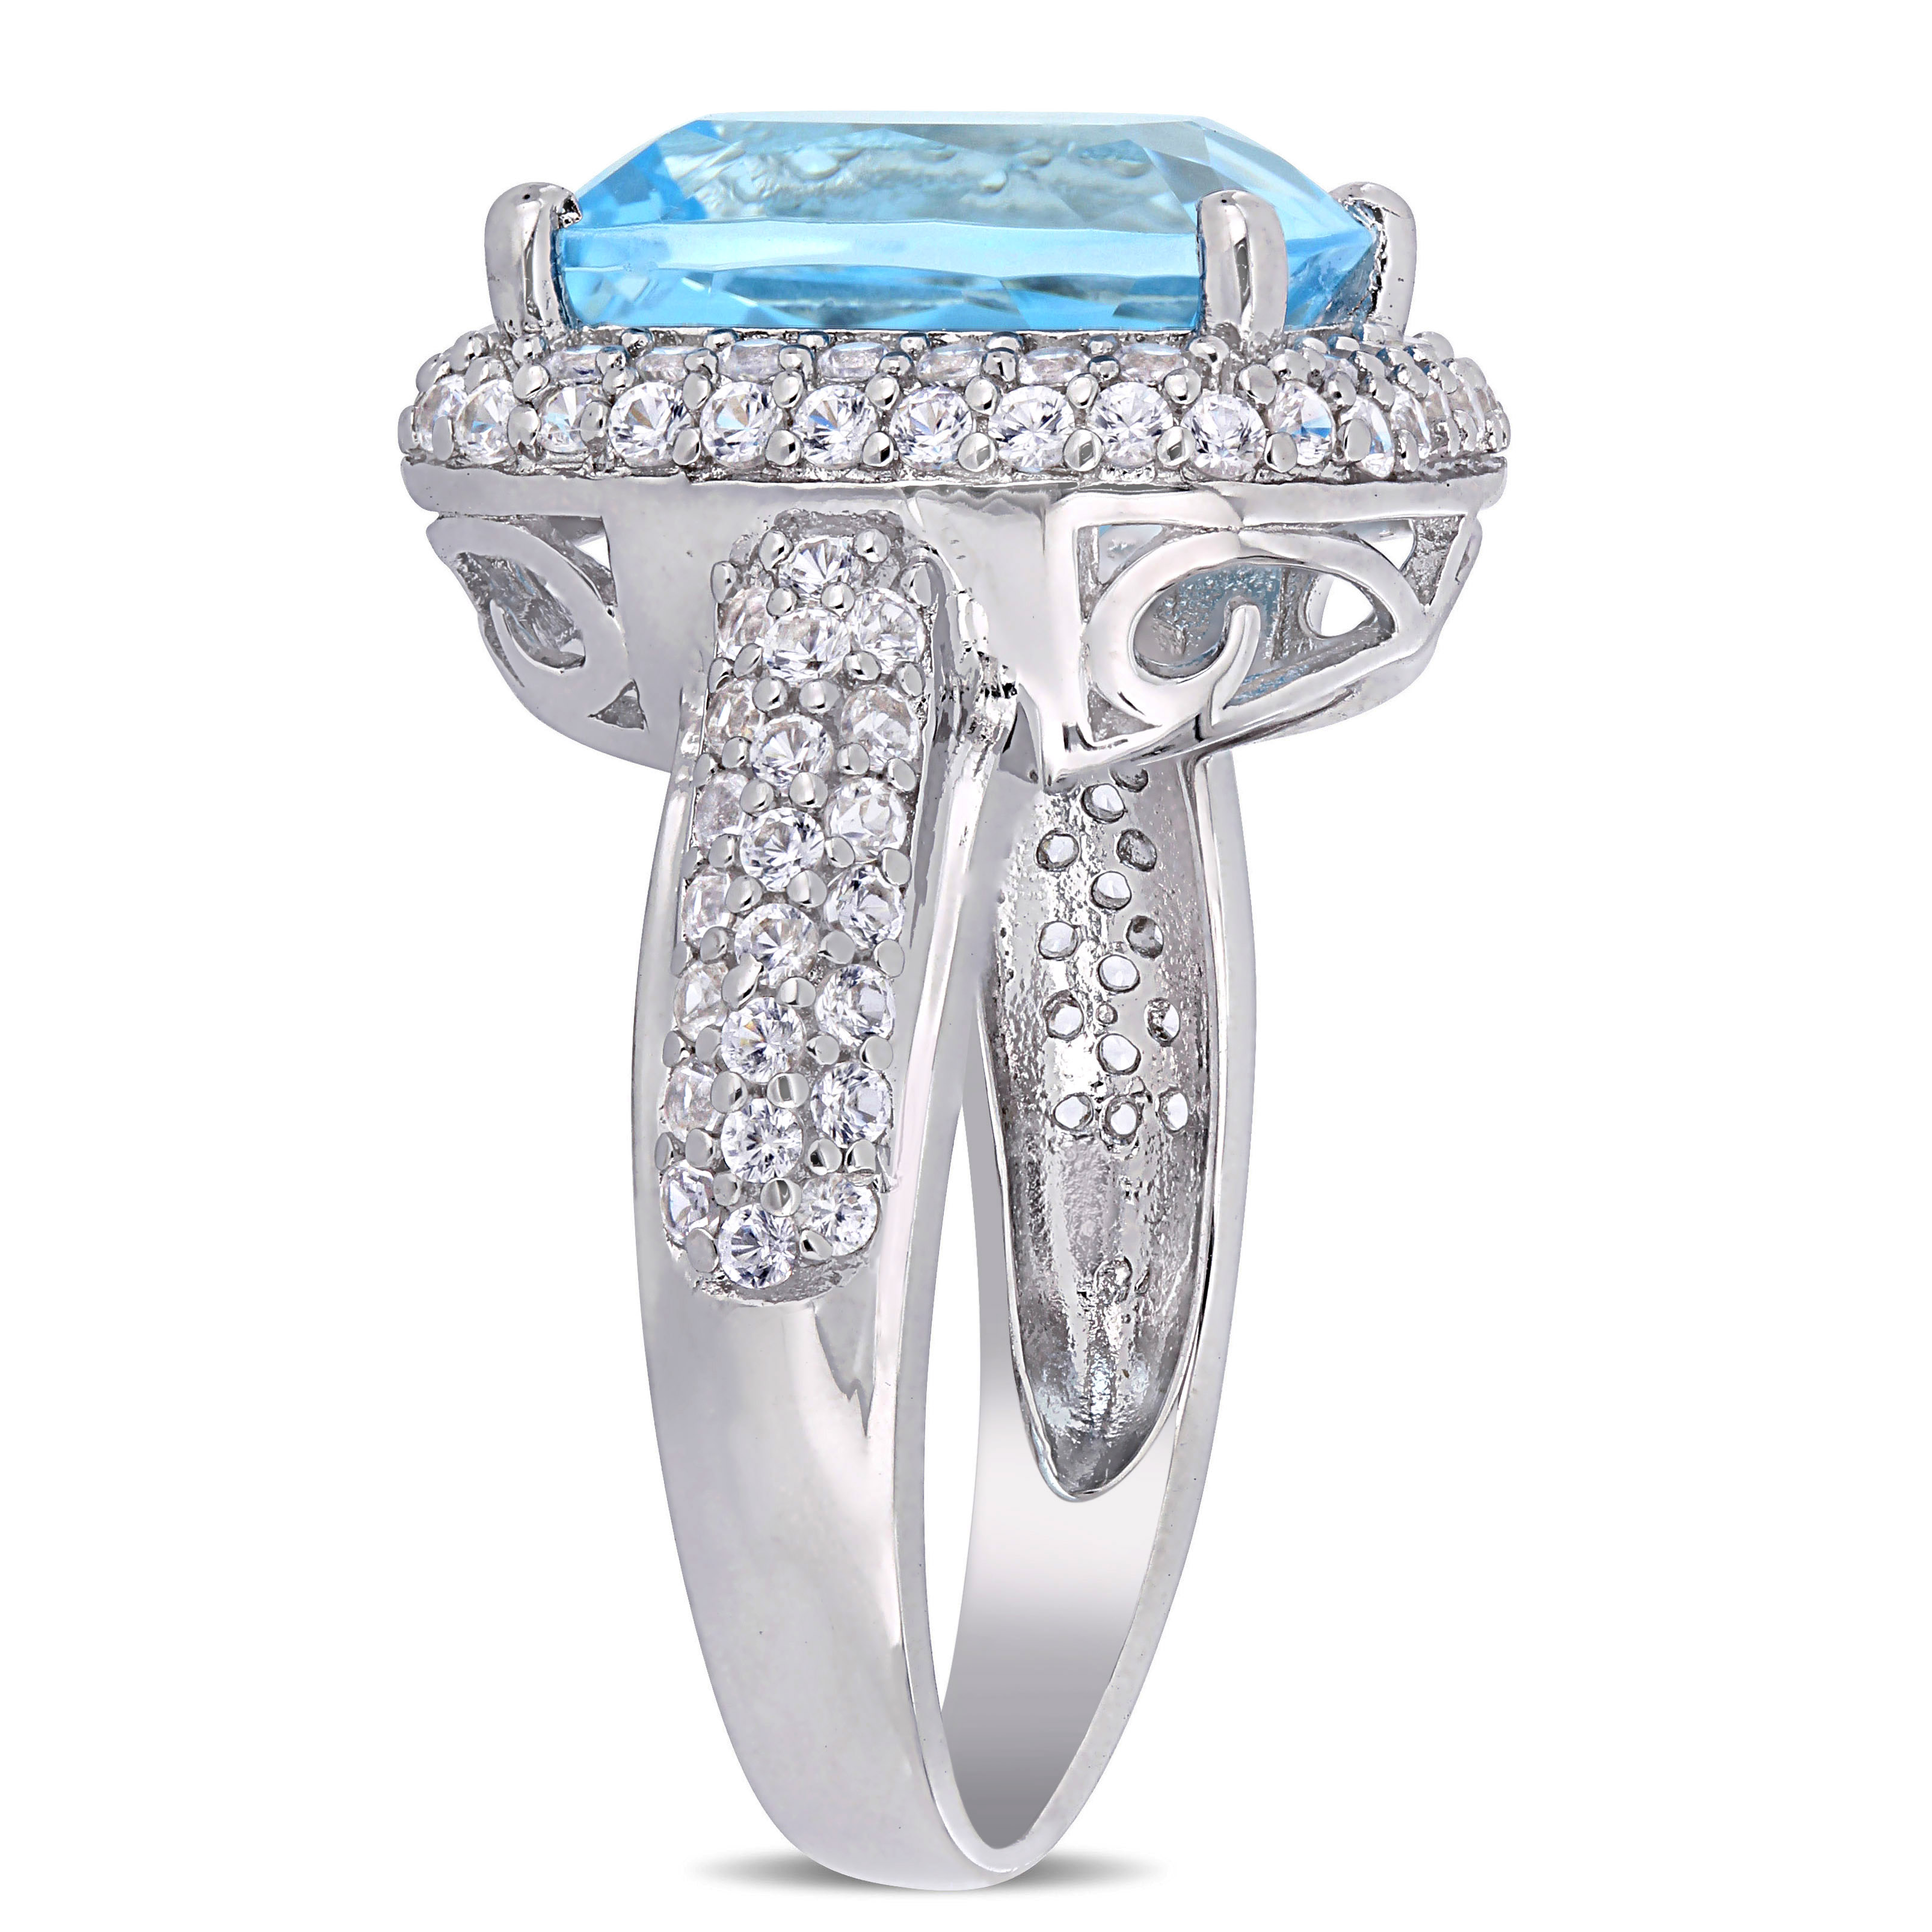 7 1/4 CT TGW Cushion Cut Blue Topaz and Created White Sapphire Double Halo Ring in Sterling Silver